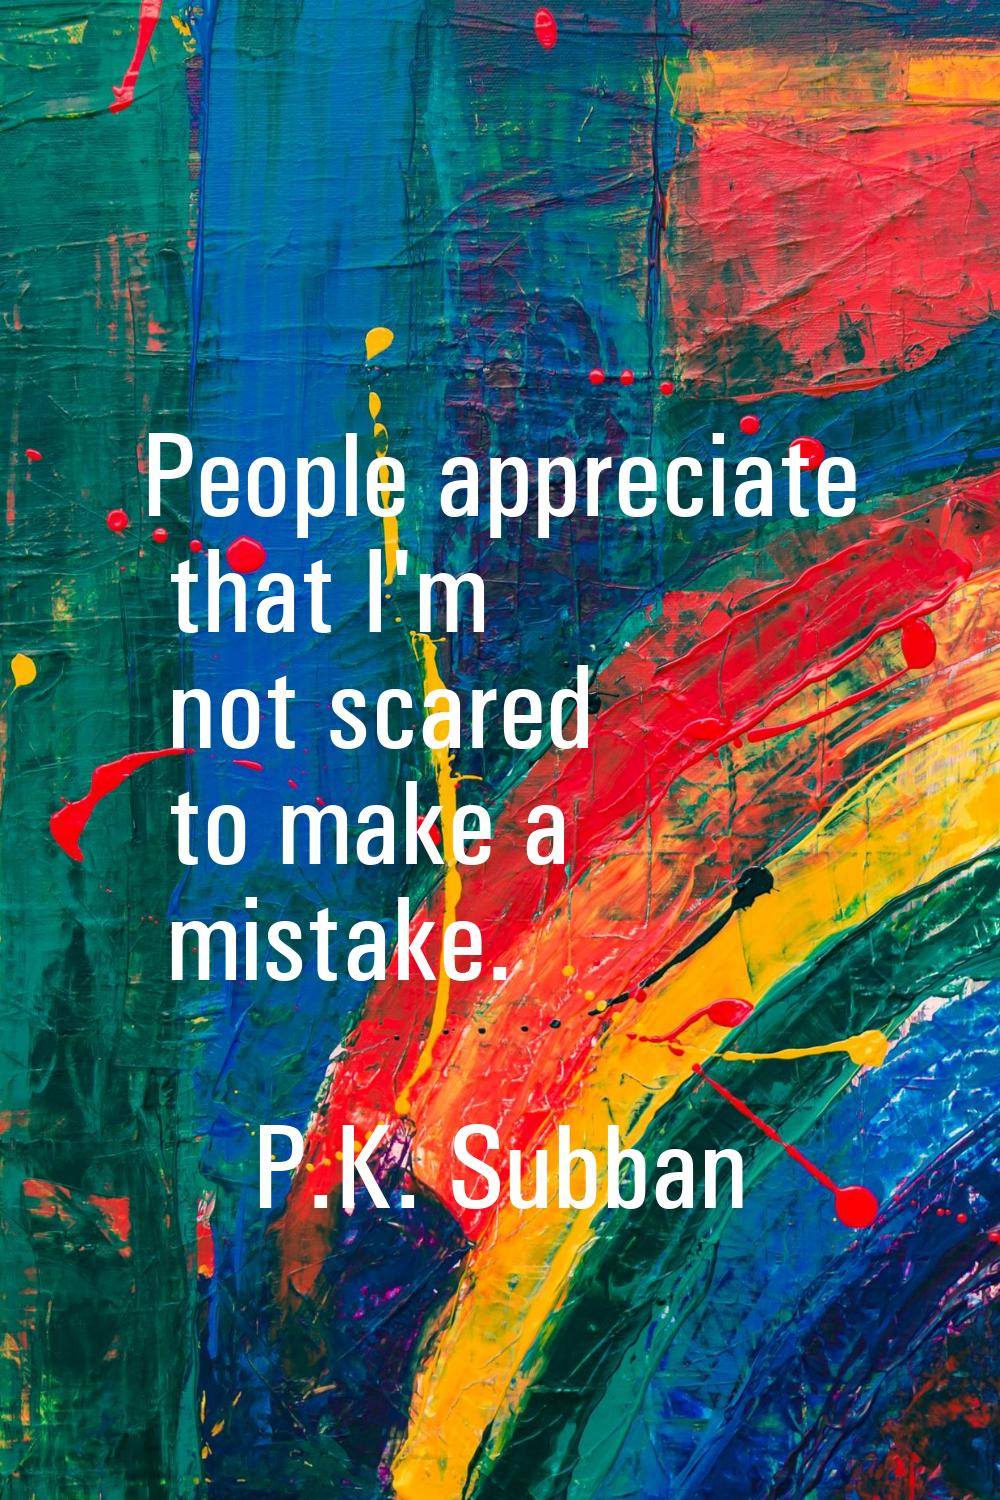 People appreciate that I'm not scared to make a mistake.